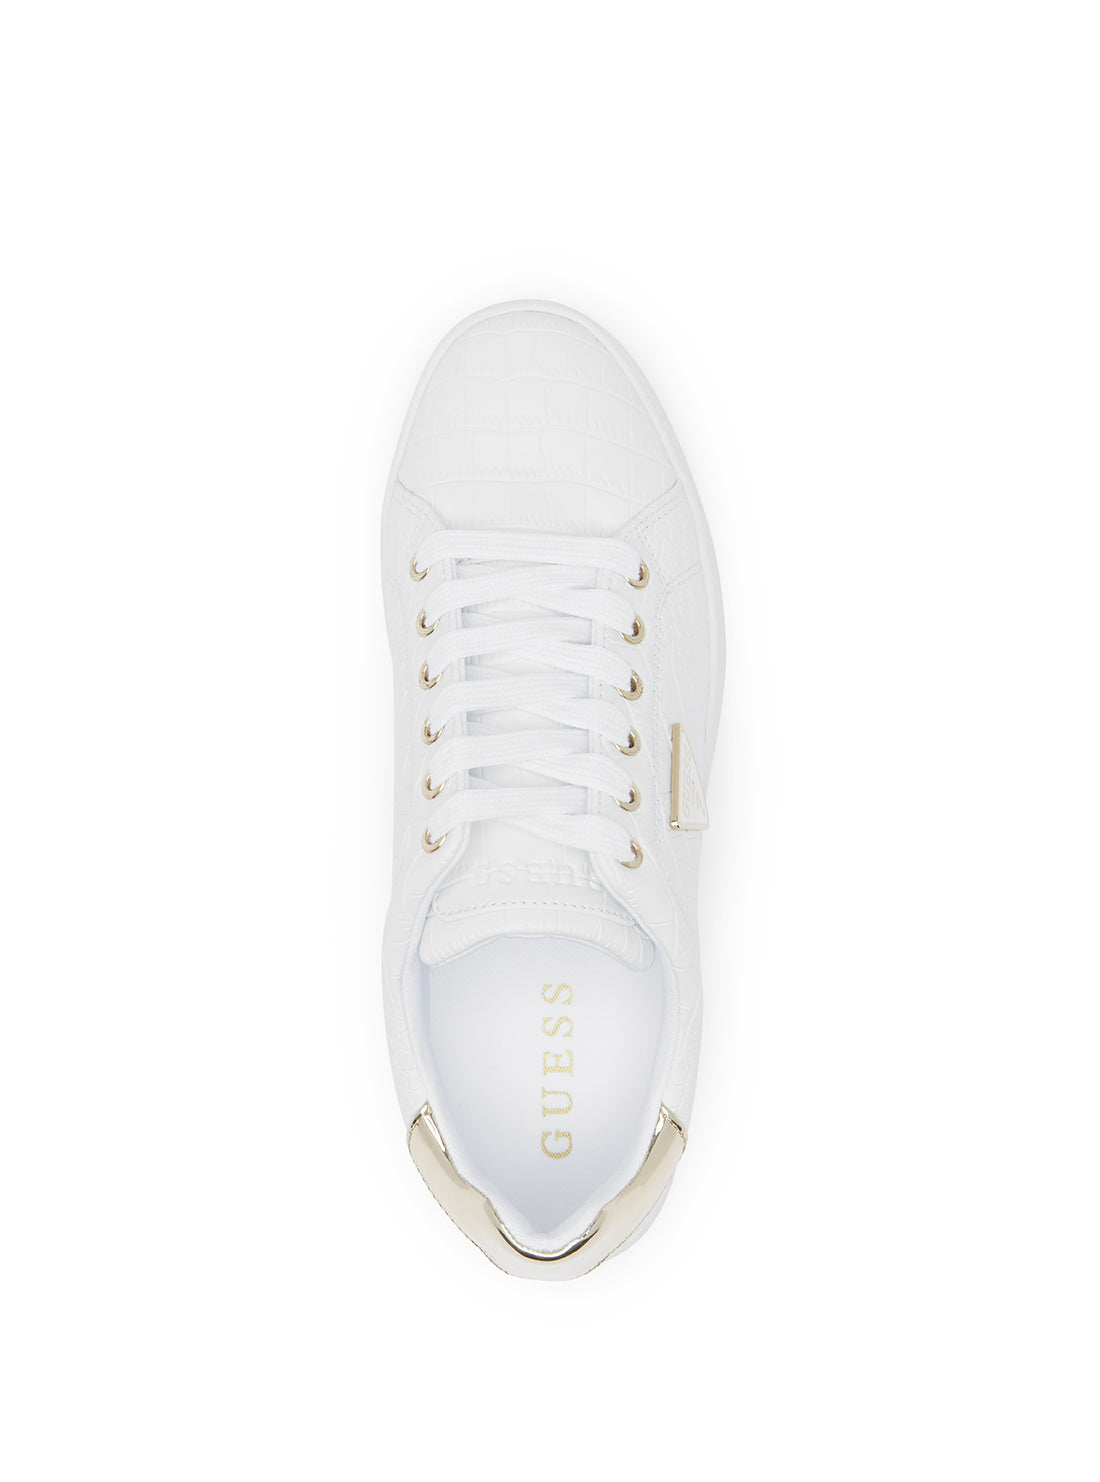 White Reshy-A Sneakers | GUESS Women's Shoes | top view